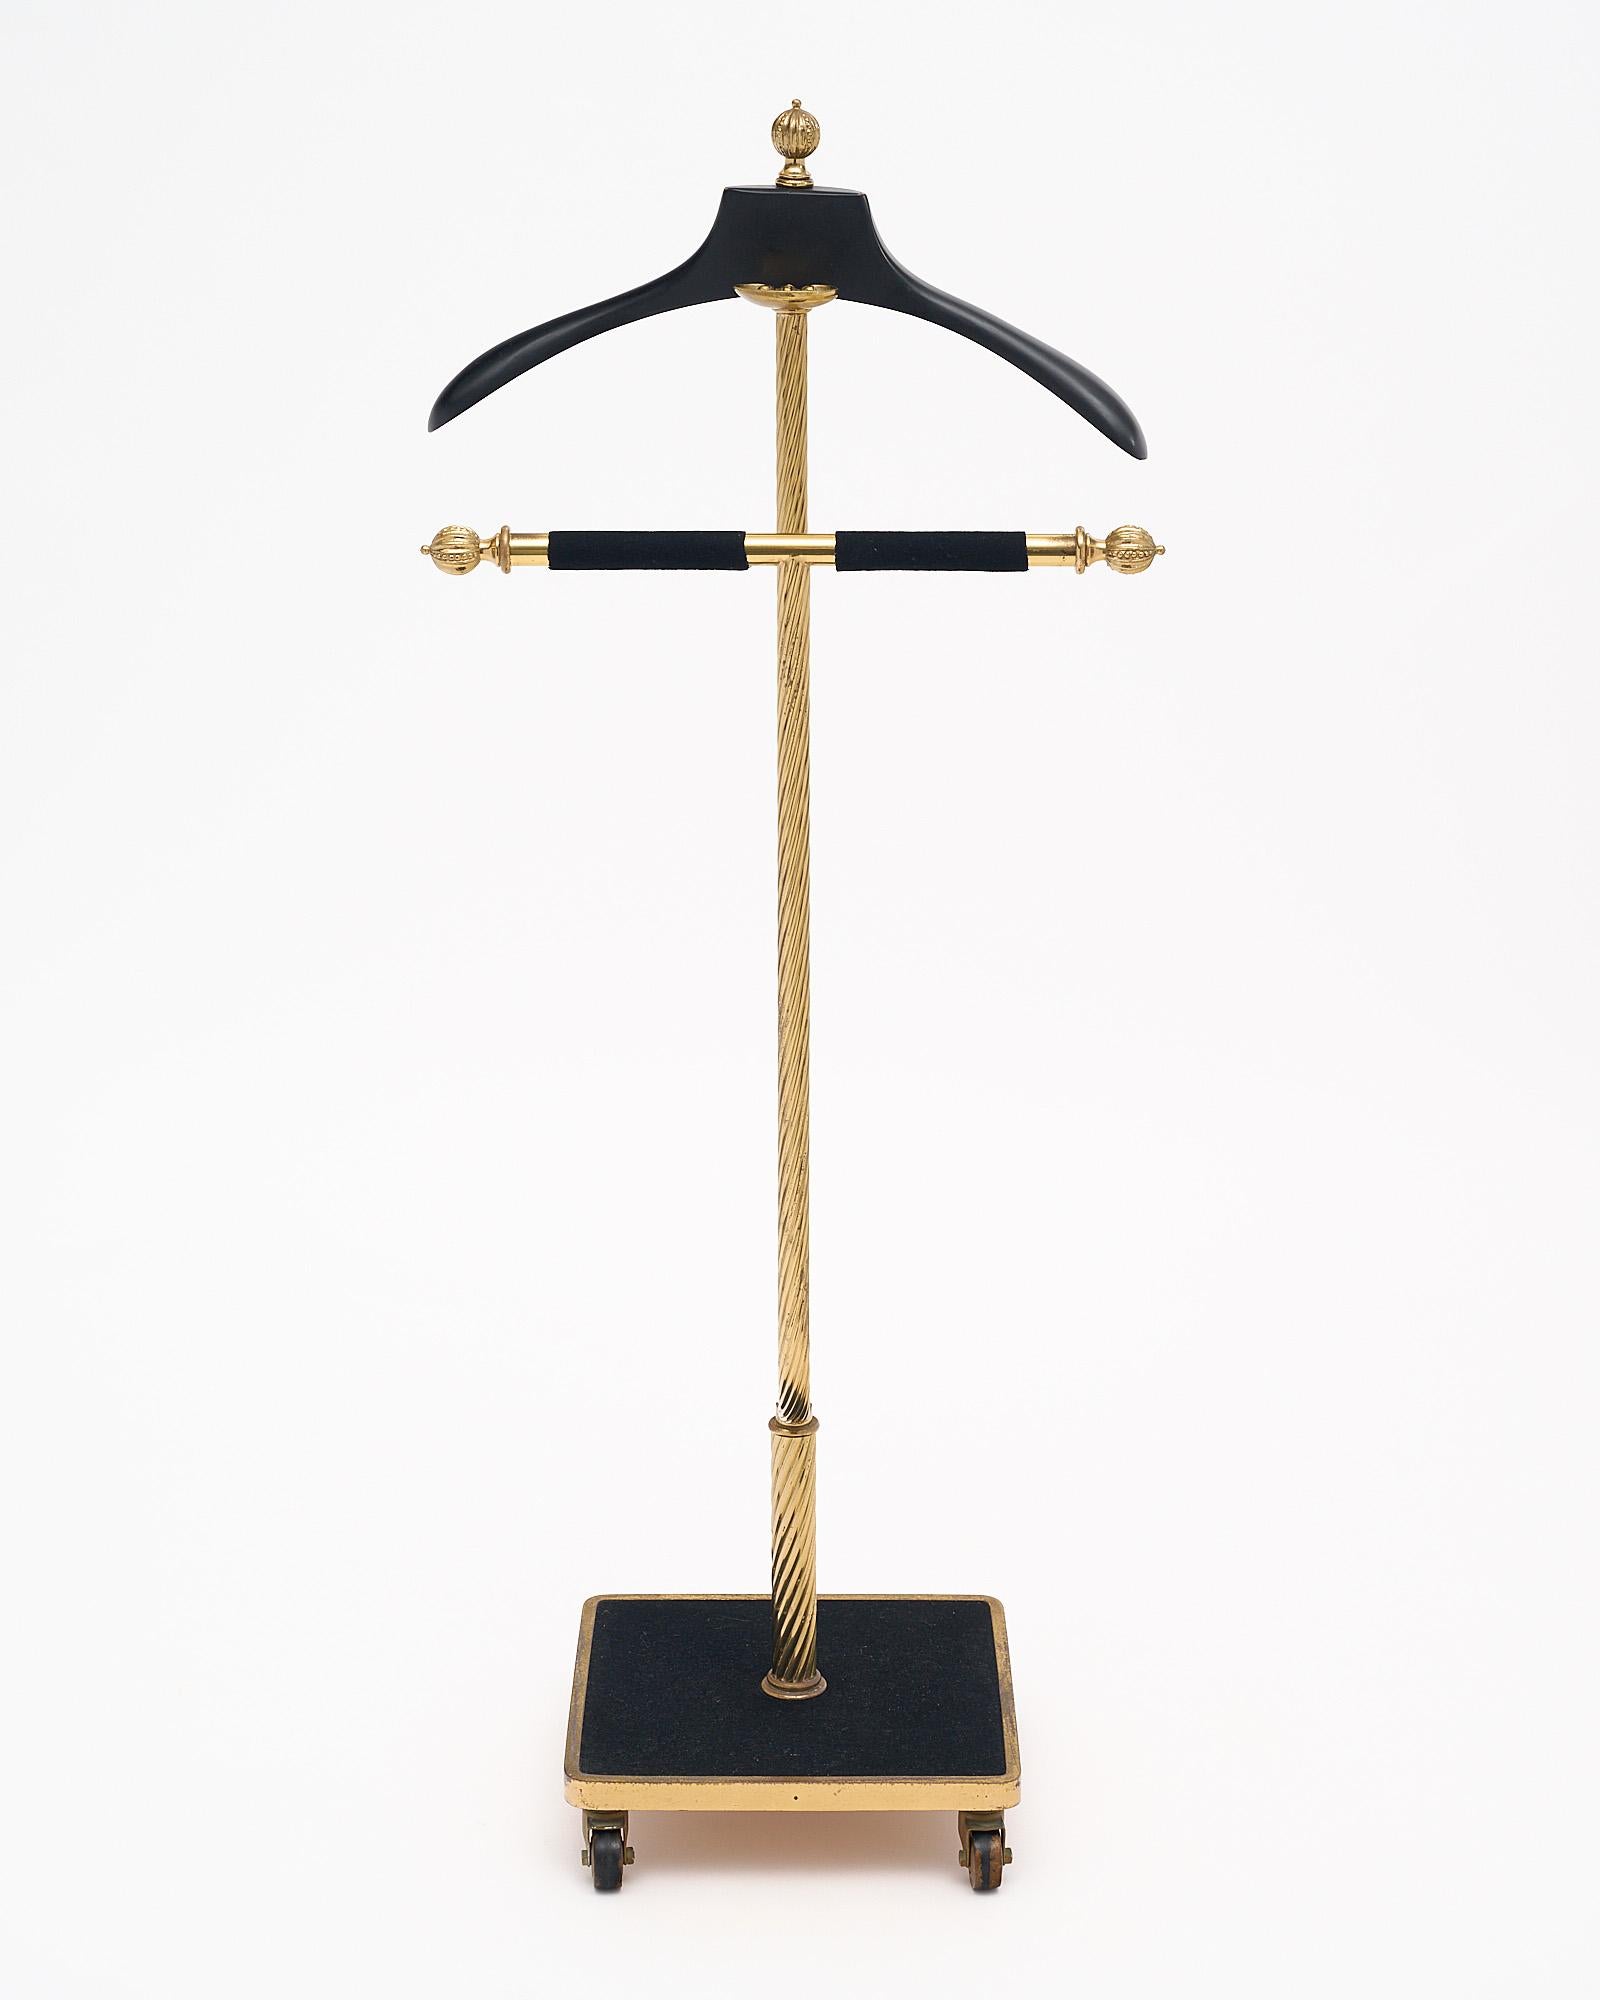 Valet from the Art Deco period in France; of brass featuring a “torsado” design and a gilded brass handcuff holder The hanger is made of ebonized wood and the base is covered in a black felt. It sits on four original working casters. A handsome